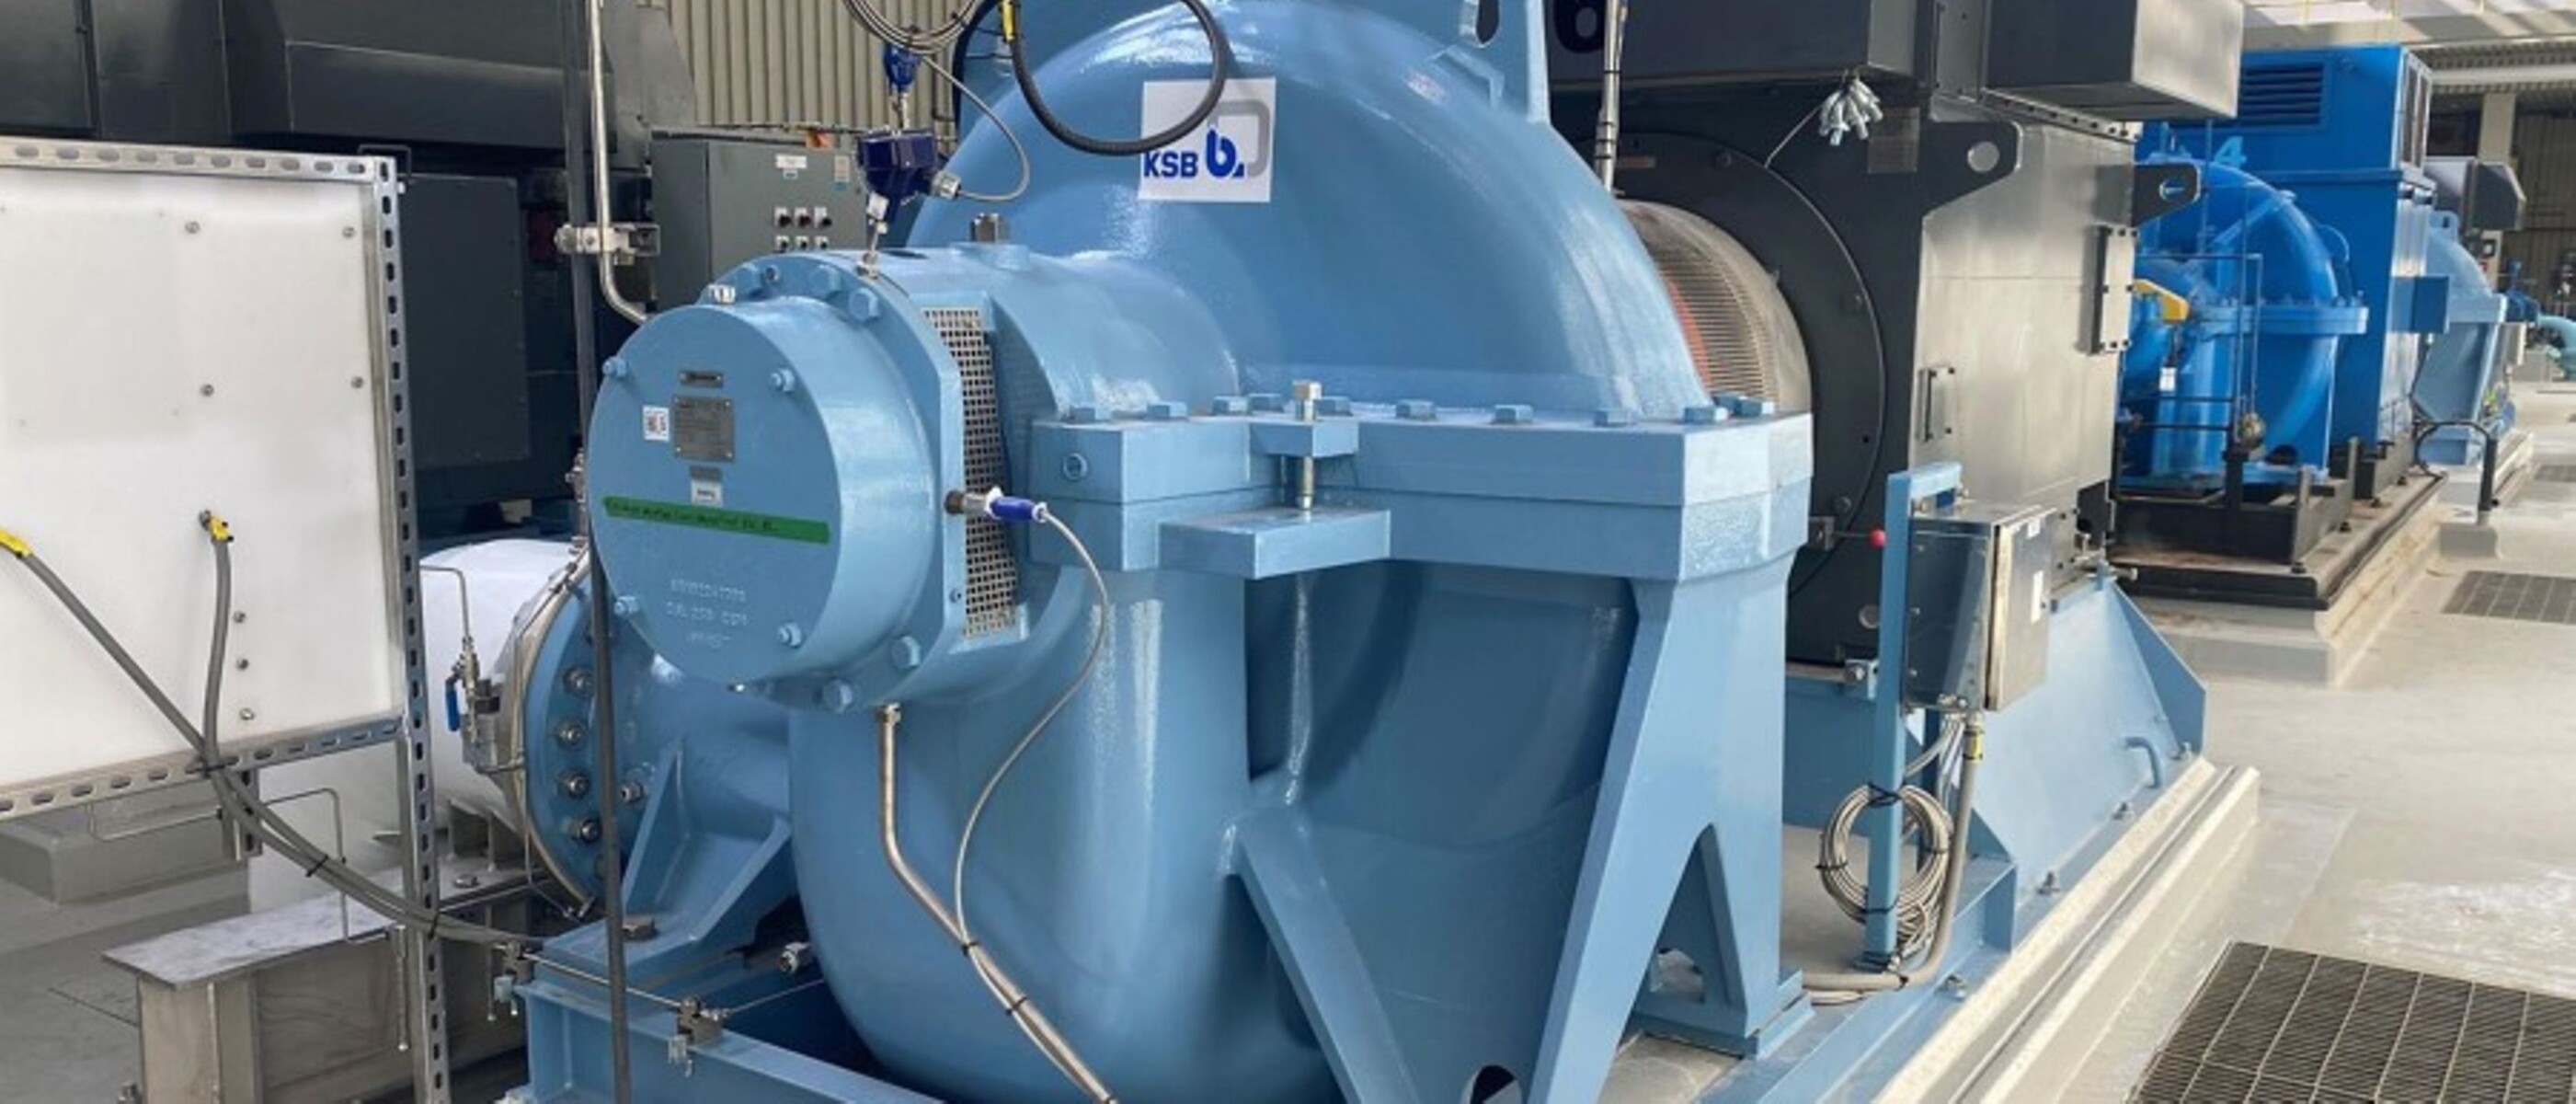 KSB type RDLO pump for drinking water supply in south-western Ontario